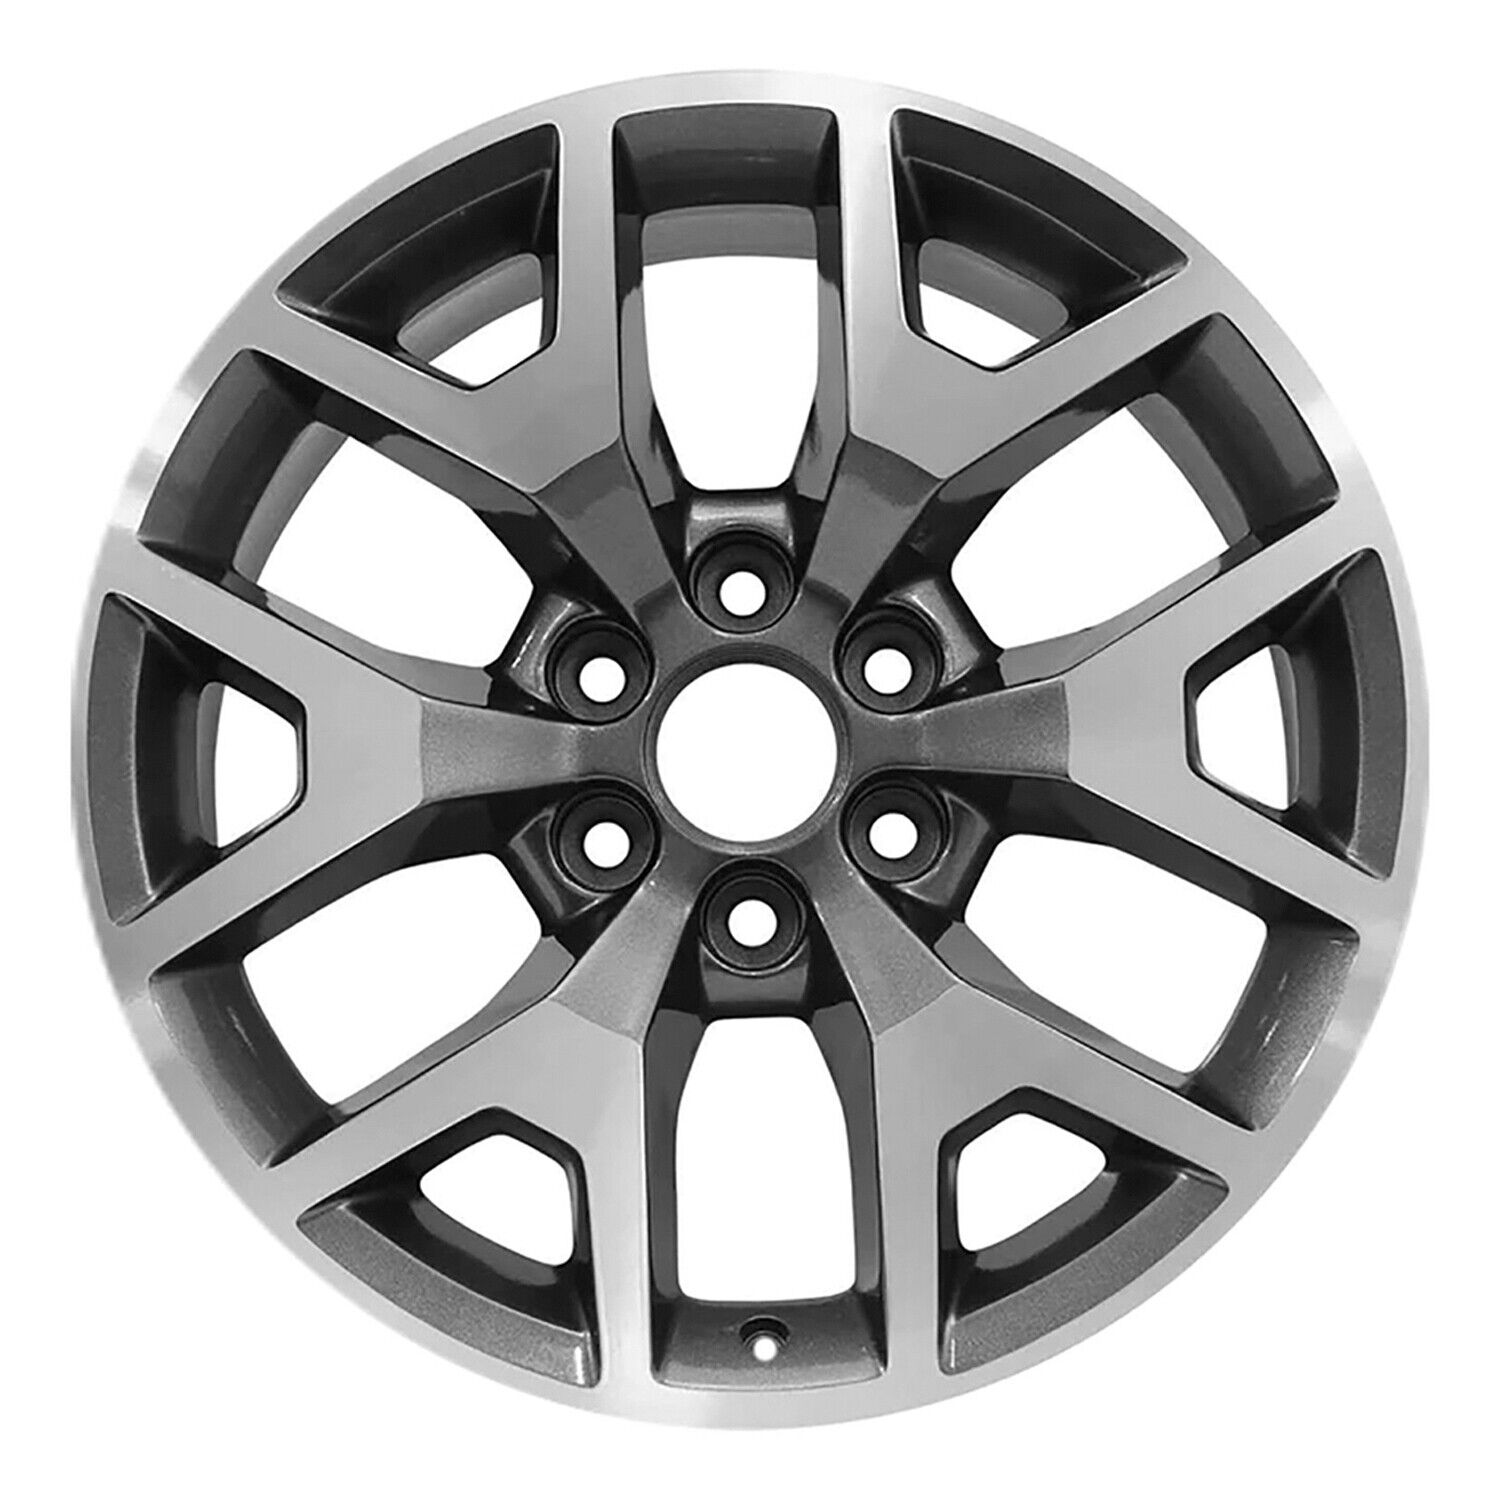 Reconditioned 20x9 Machined Medium Charcoal Metallic Wheel fits 560-05658